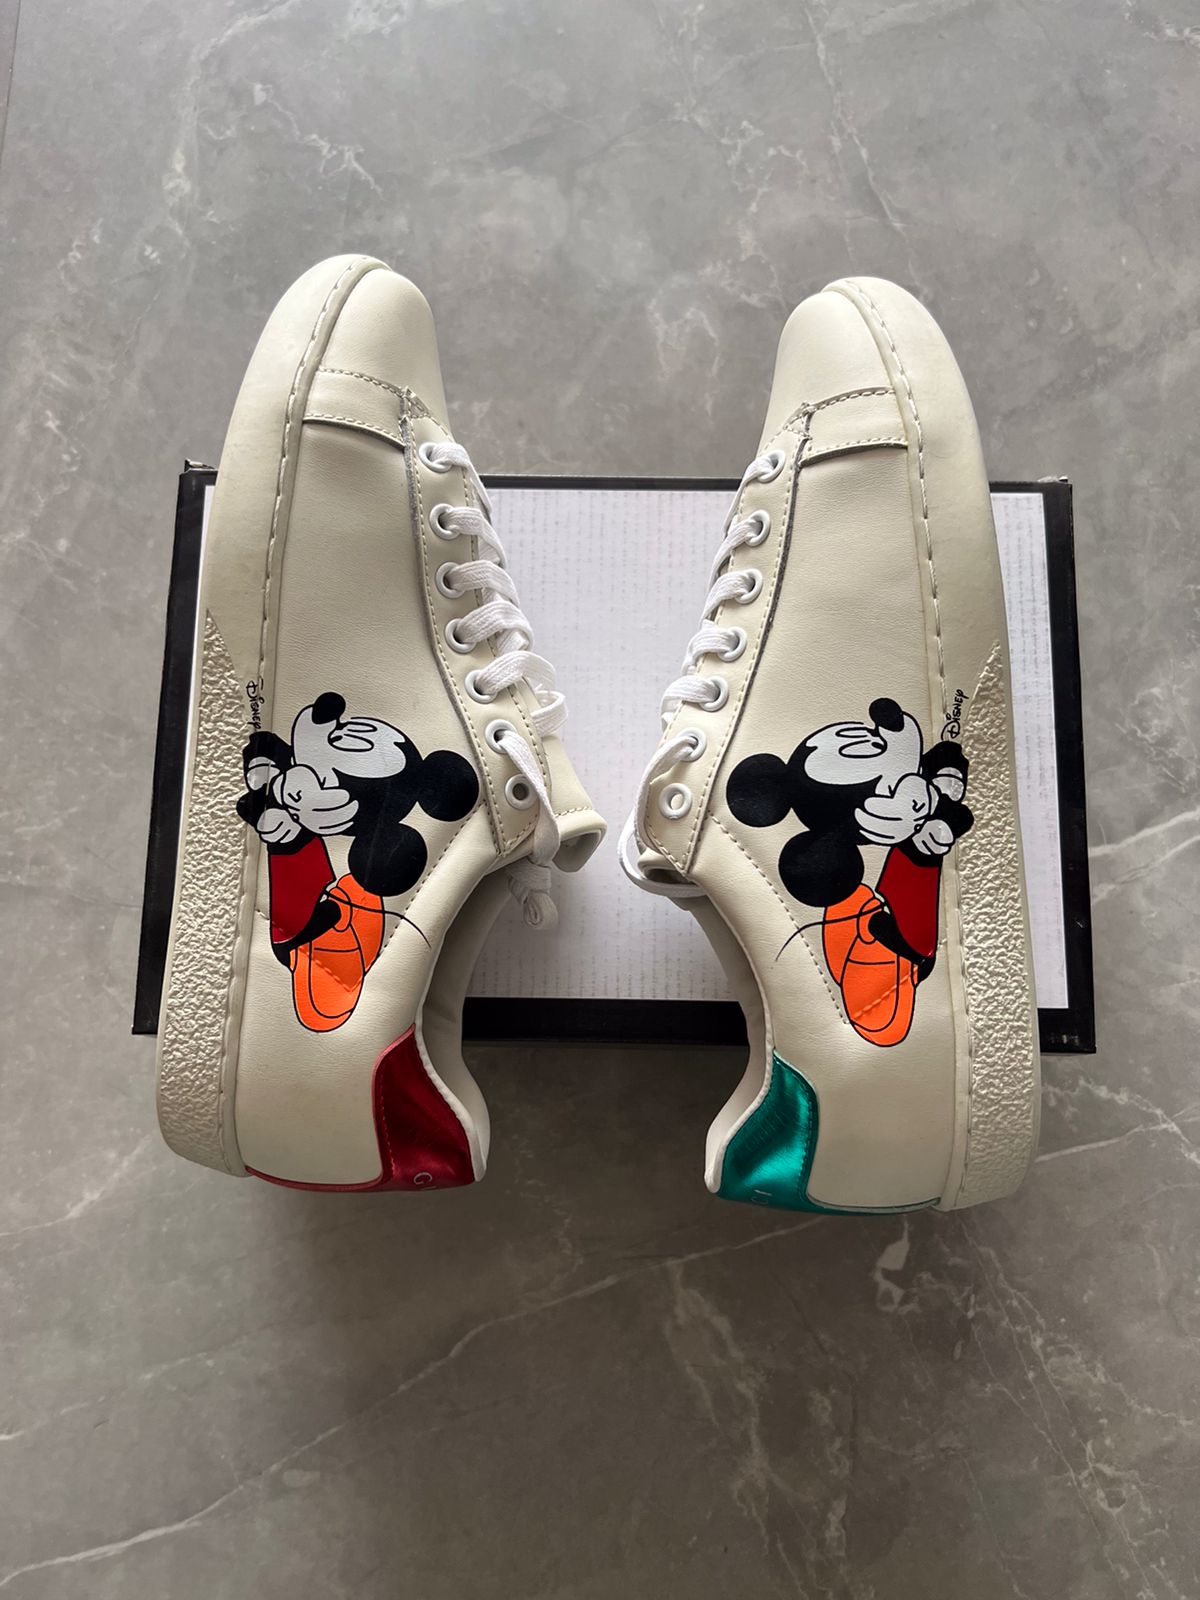 Disney X Ace Low Sneakers - Get Yours Now!